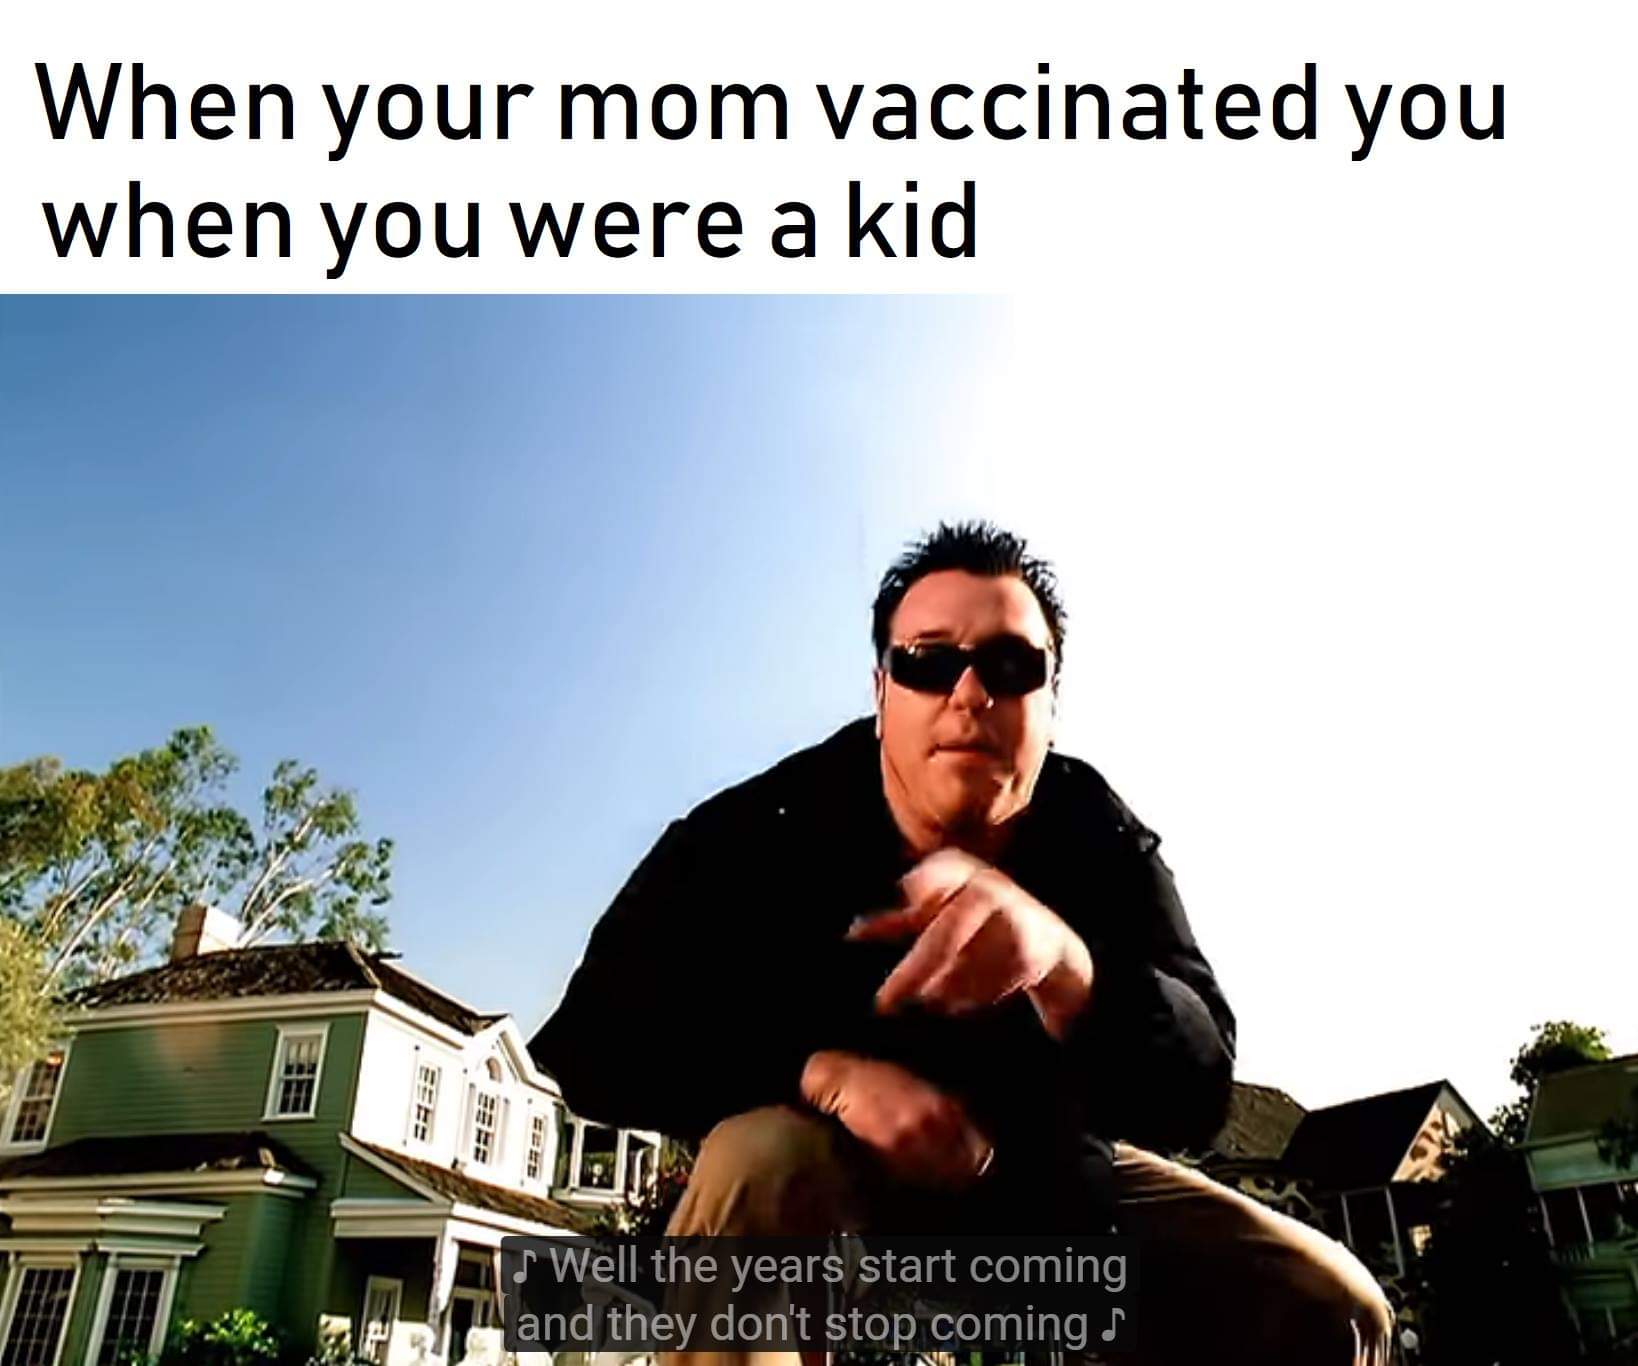 anti vax smash mouth meme - When your mom vaccinated you when you were a kid As Well the years start coming and they don't stop coming s Yi